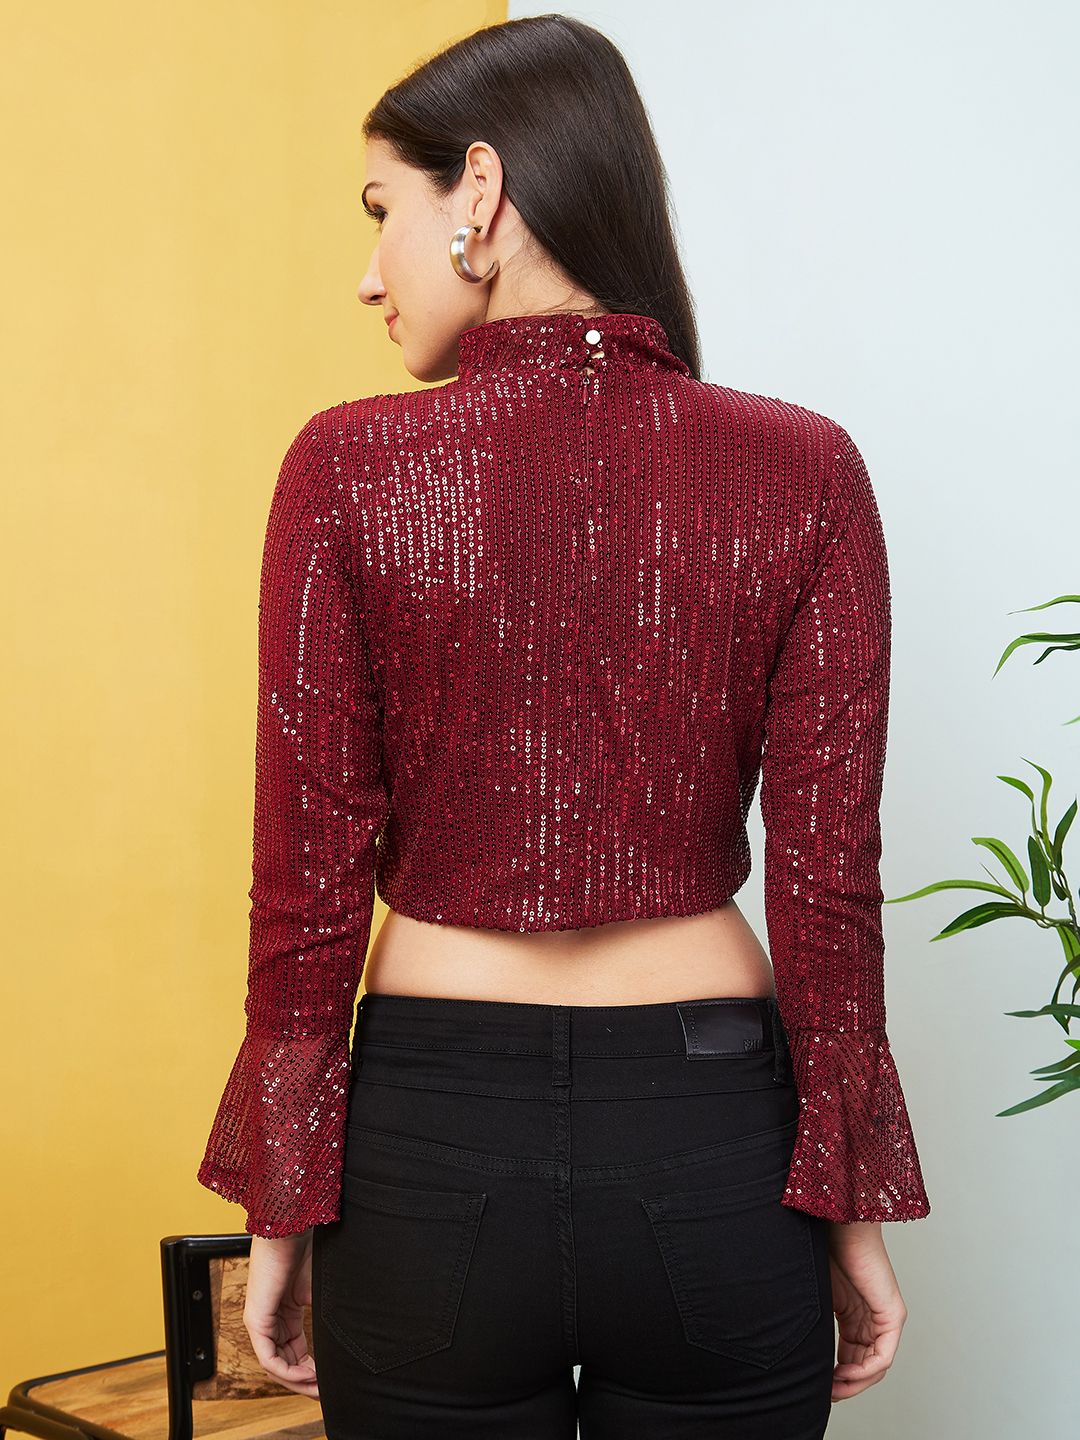 Globus Women Maroon Embellished High Neck Bell Sleeves Sequined Party Top